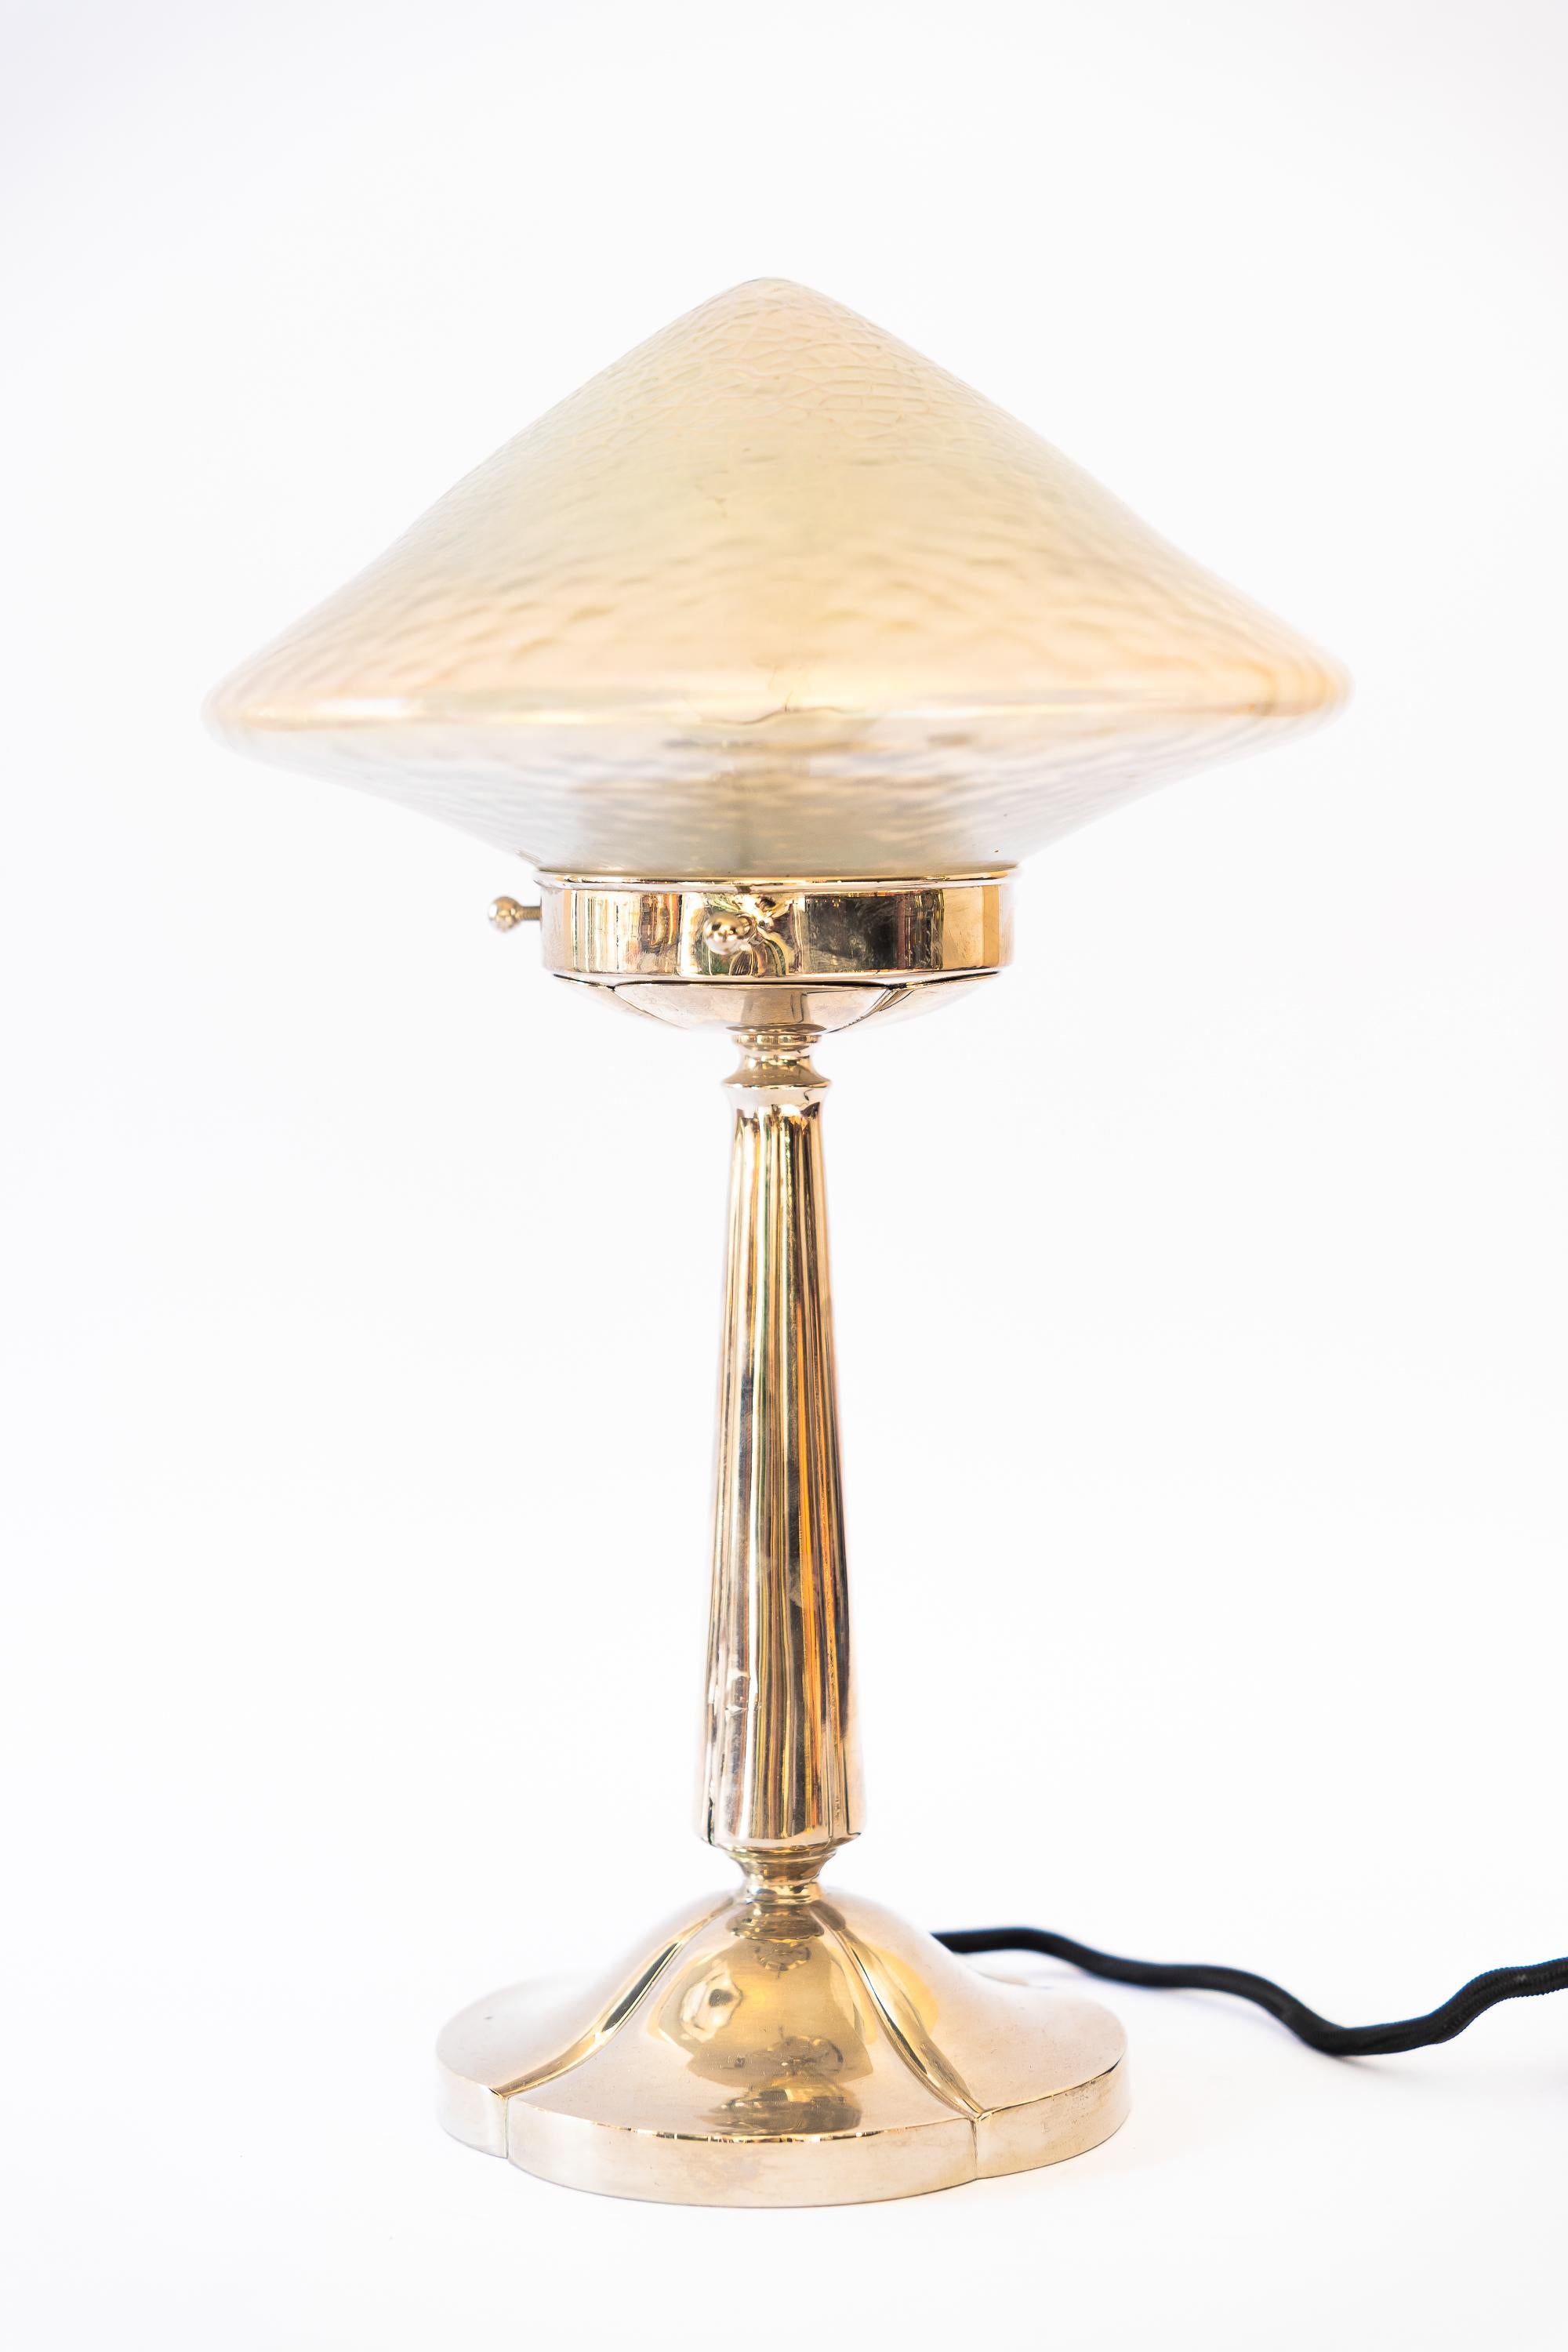 Nickel-plated brass table lamp with beautiful glass.
Original condition